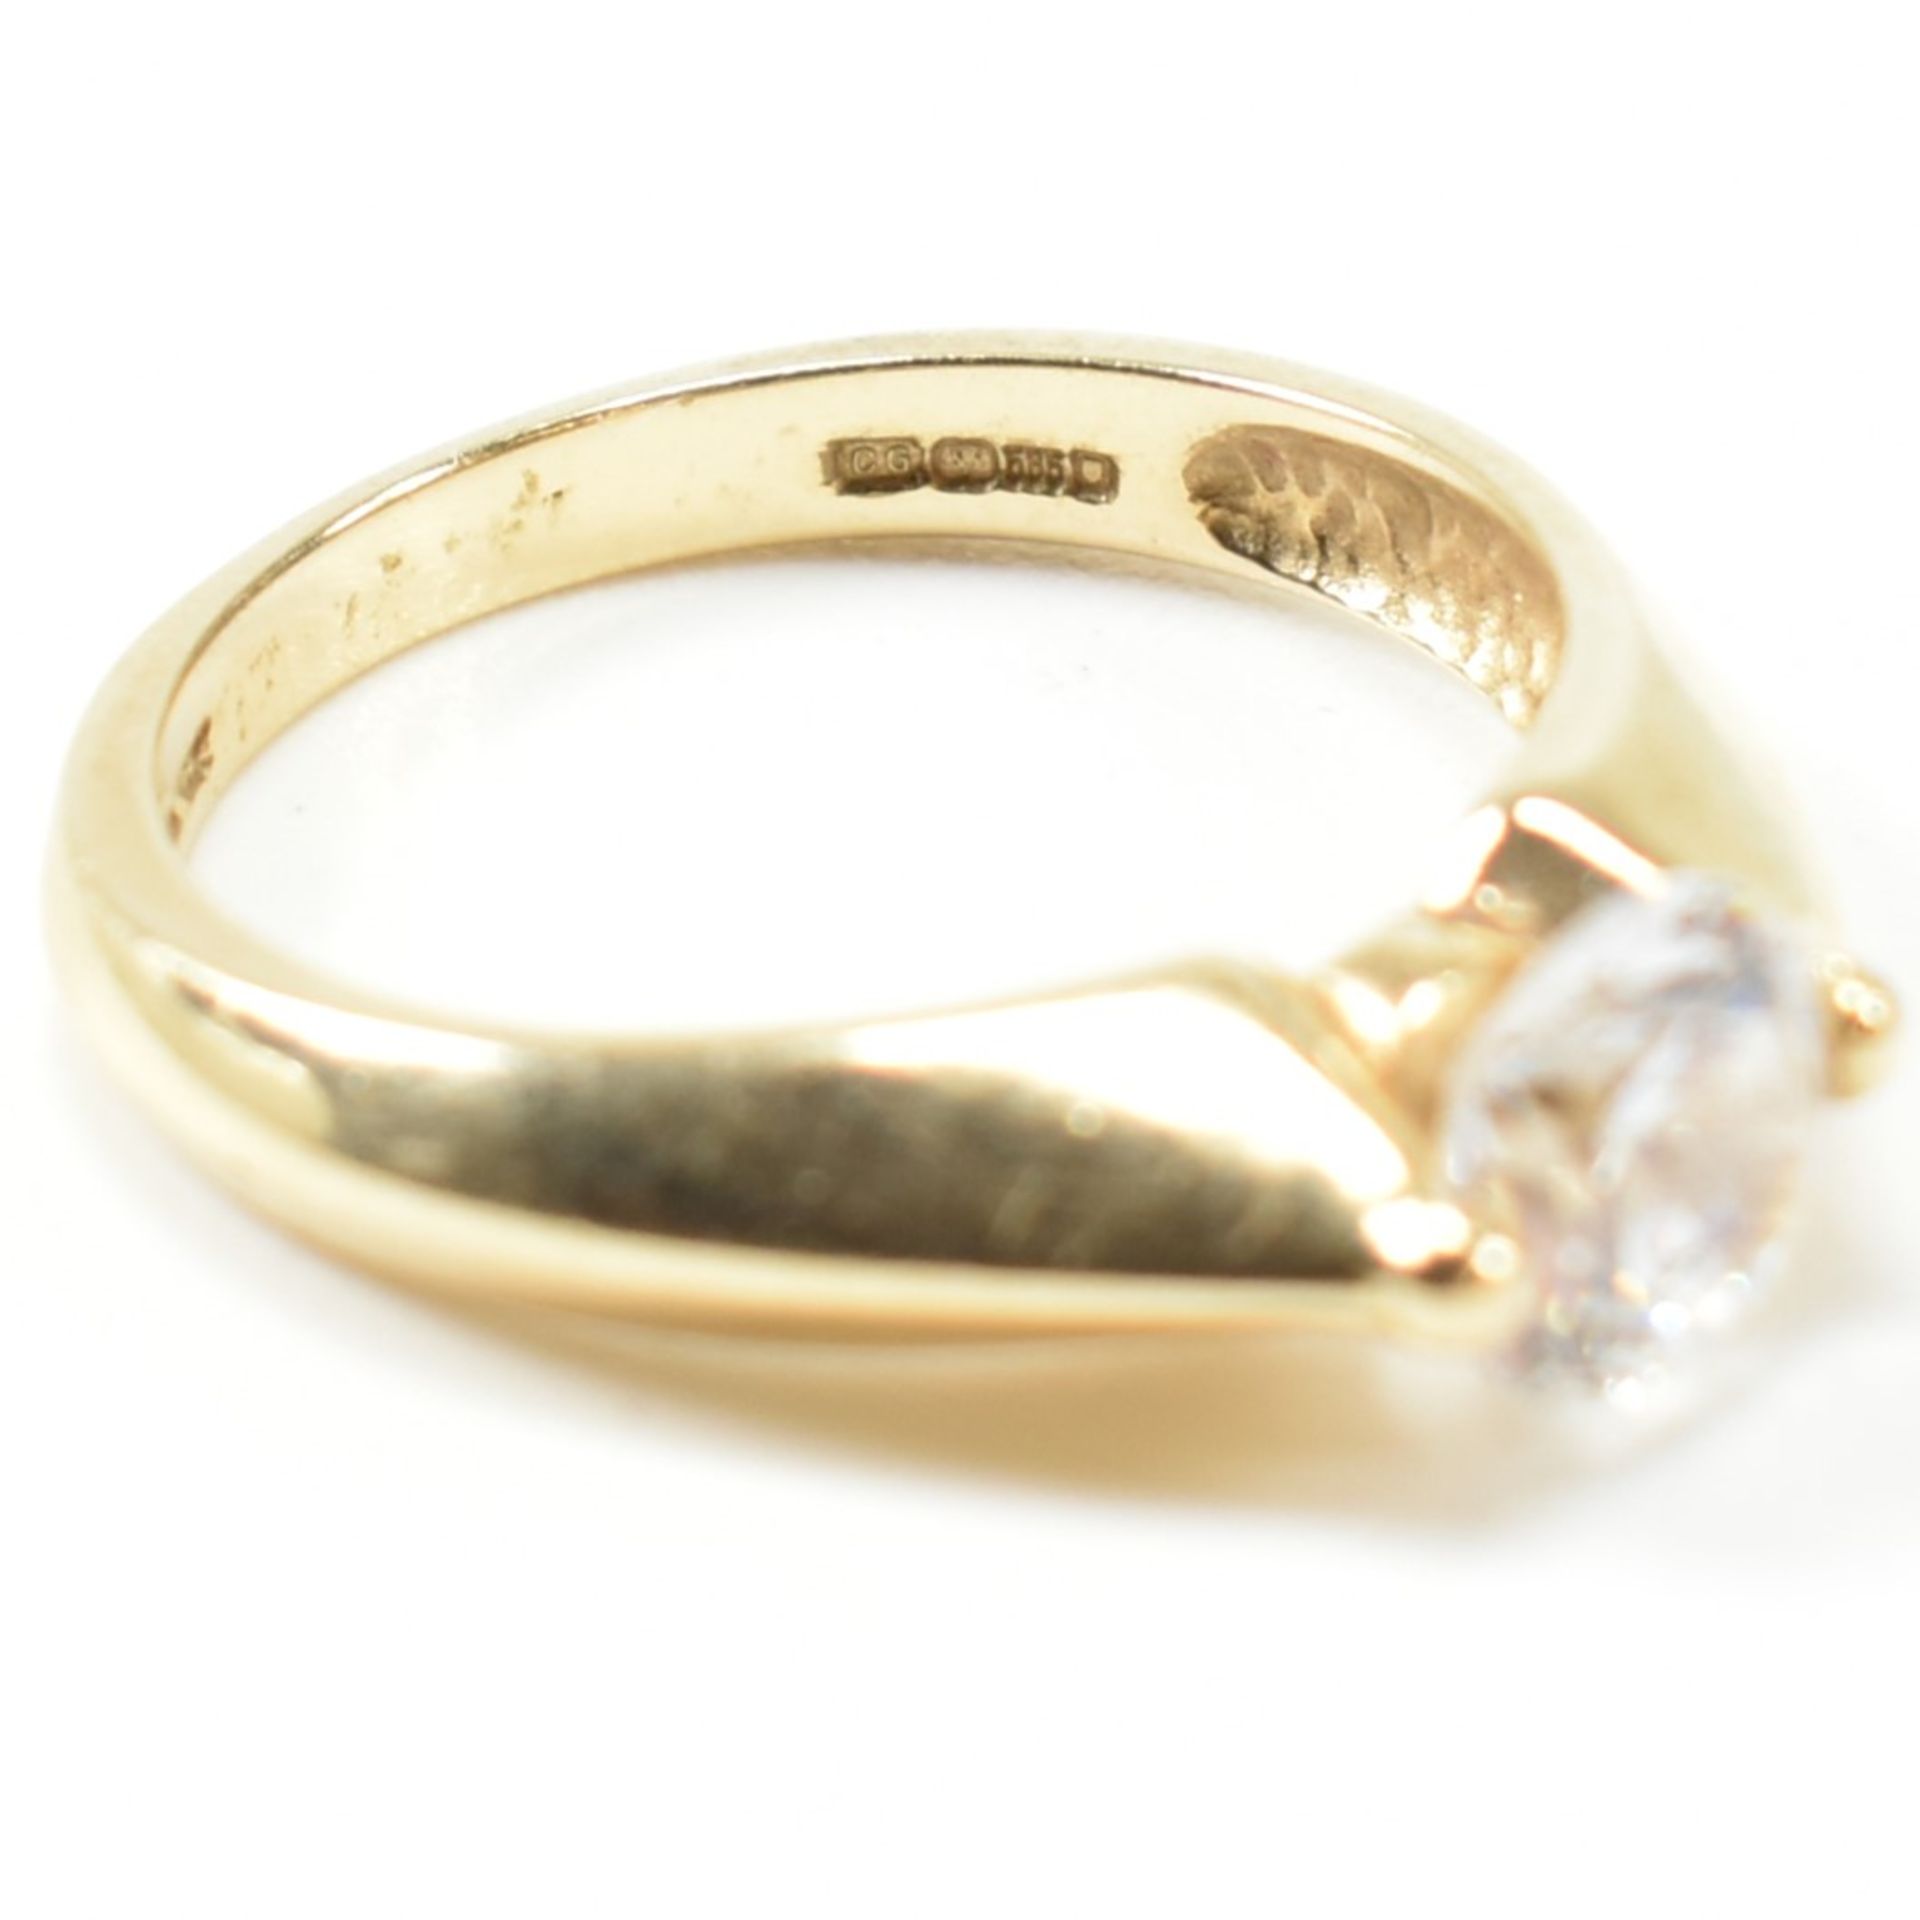 HALLMARKED 14CT GOLD & CZ SOLITAIRE RING - Image 10 of 11